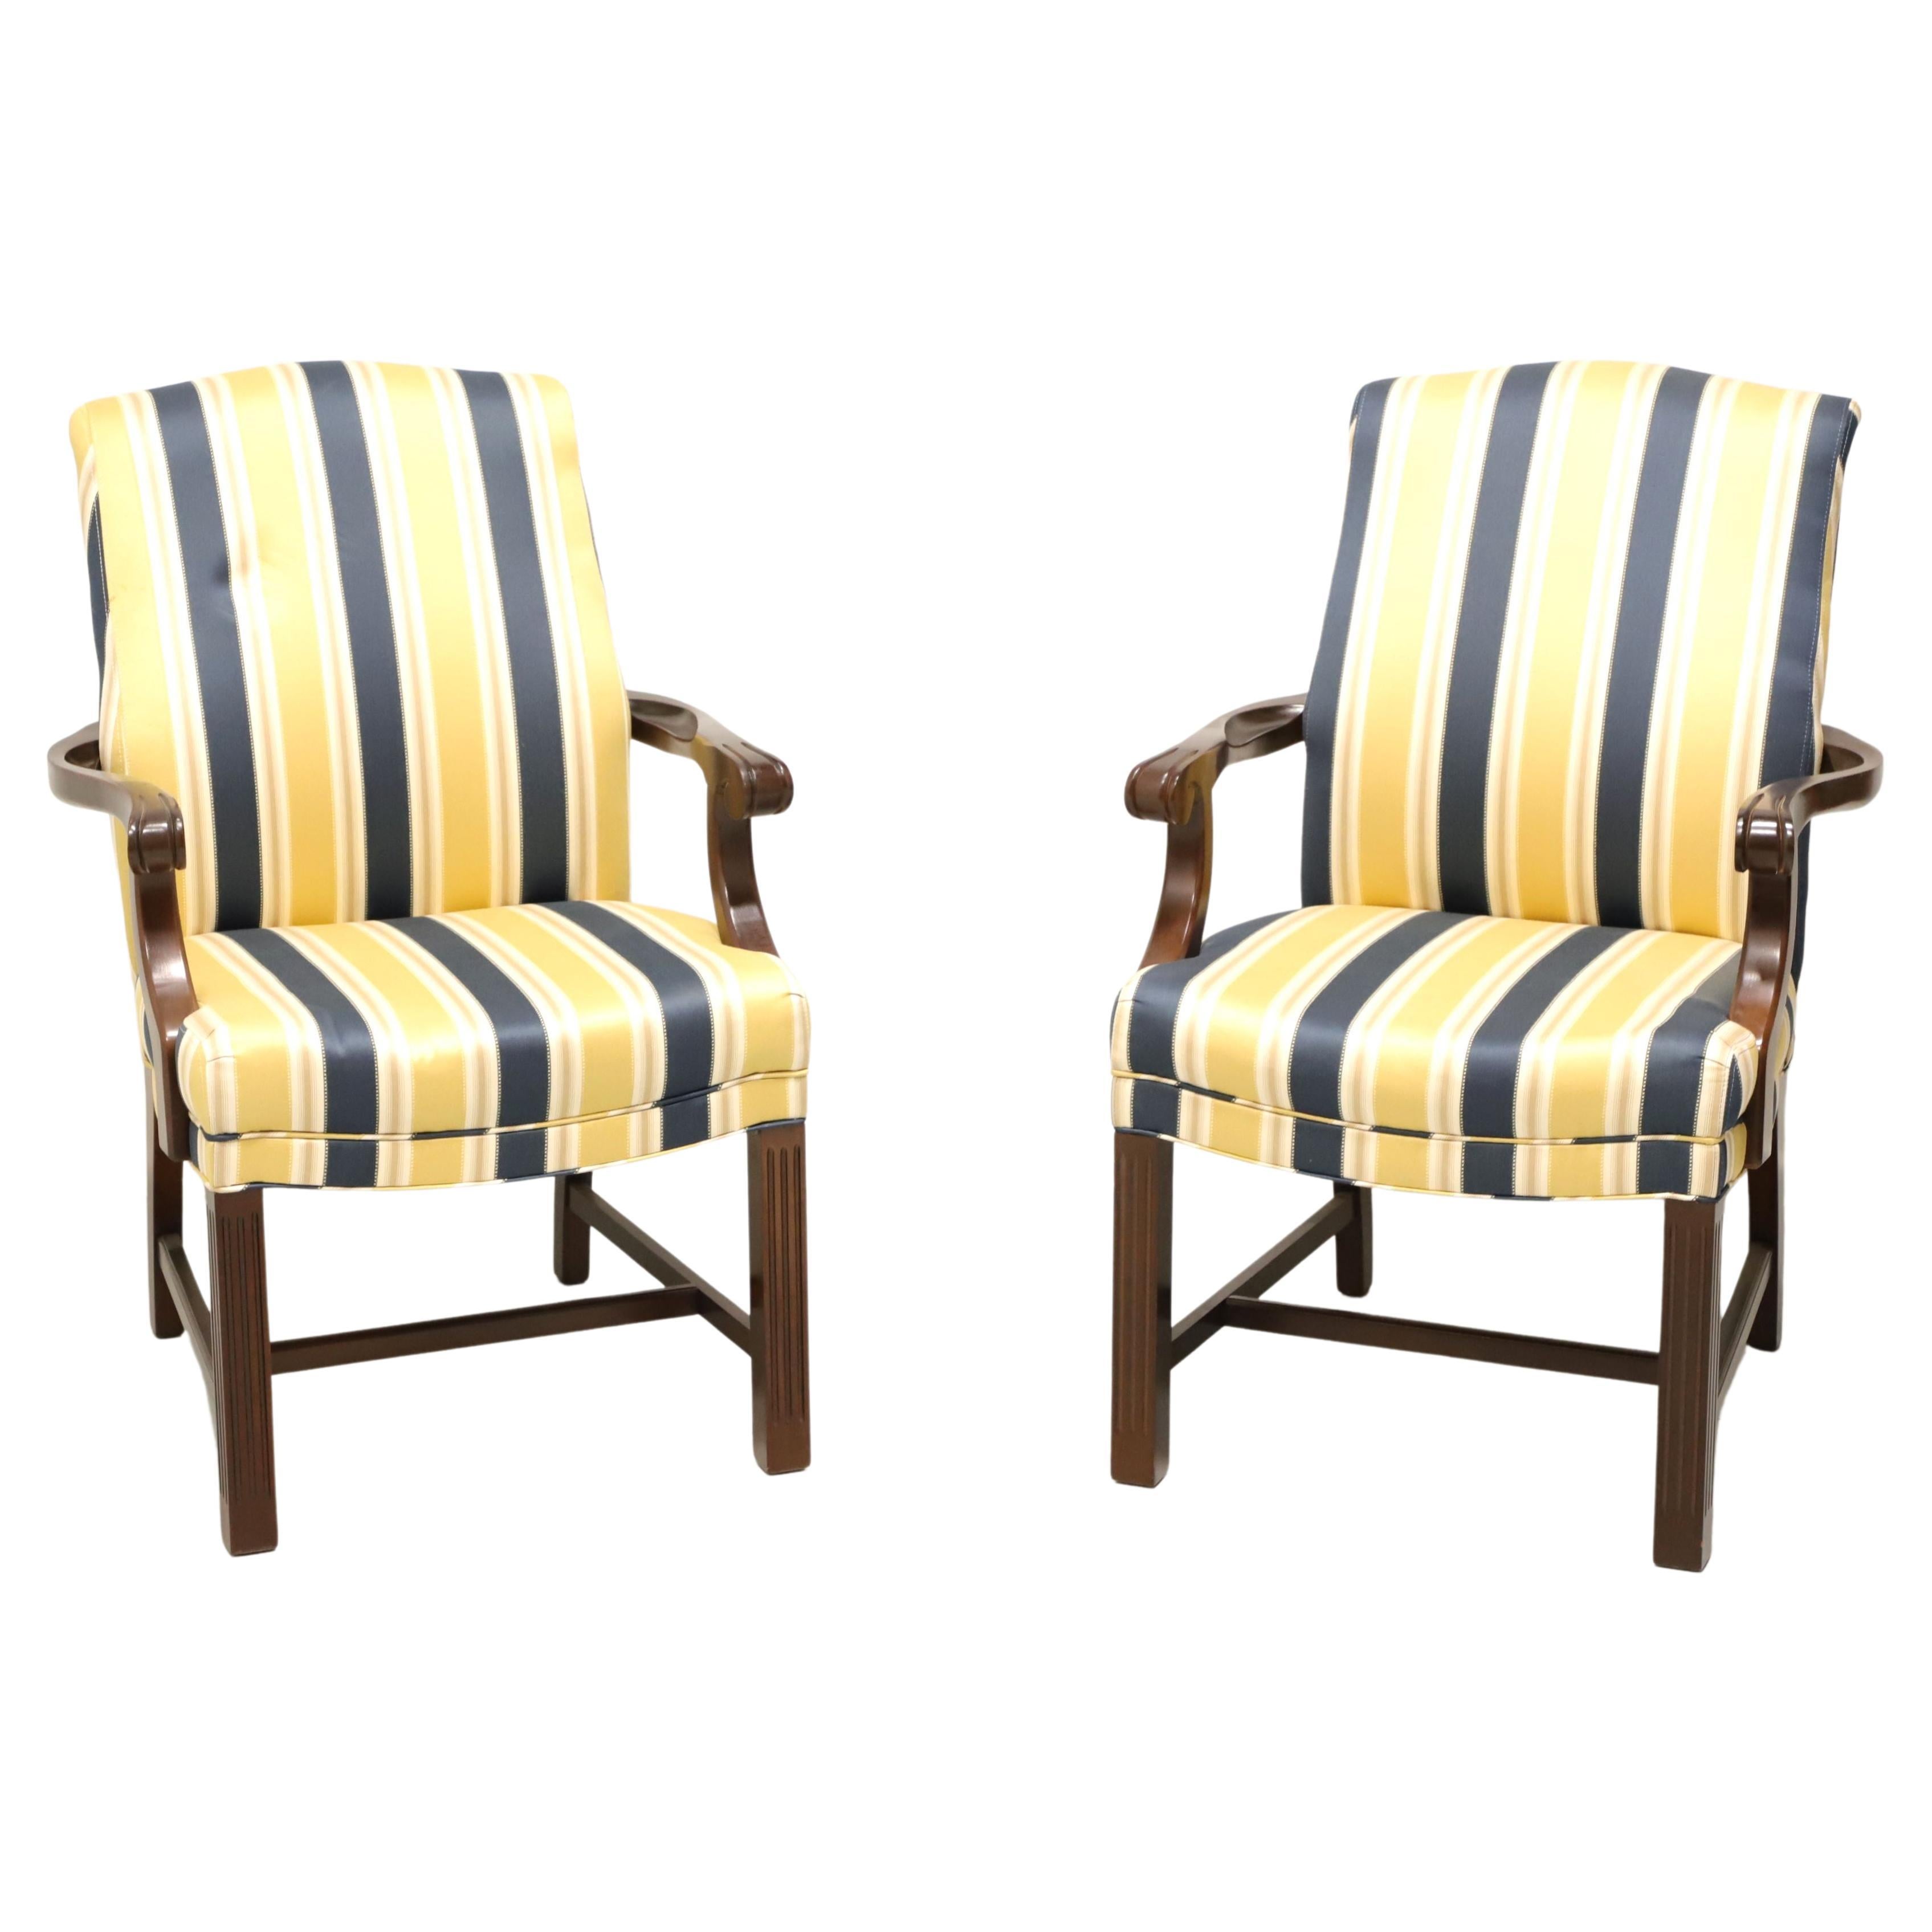 PATRICIAN Mahogany Frame Chippendale Blue & Yellow Stripe Armchairs - Pair B